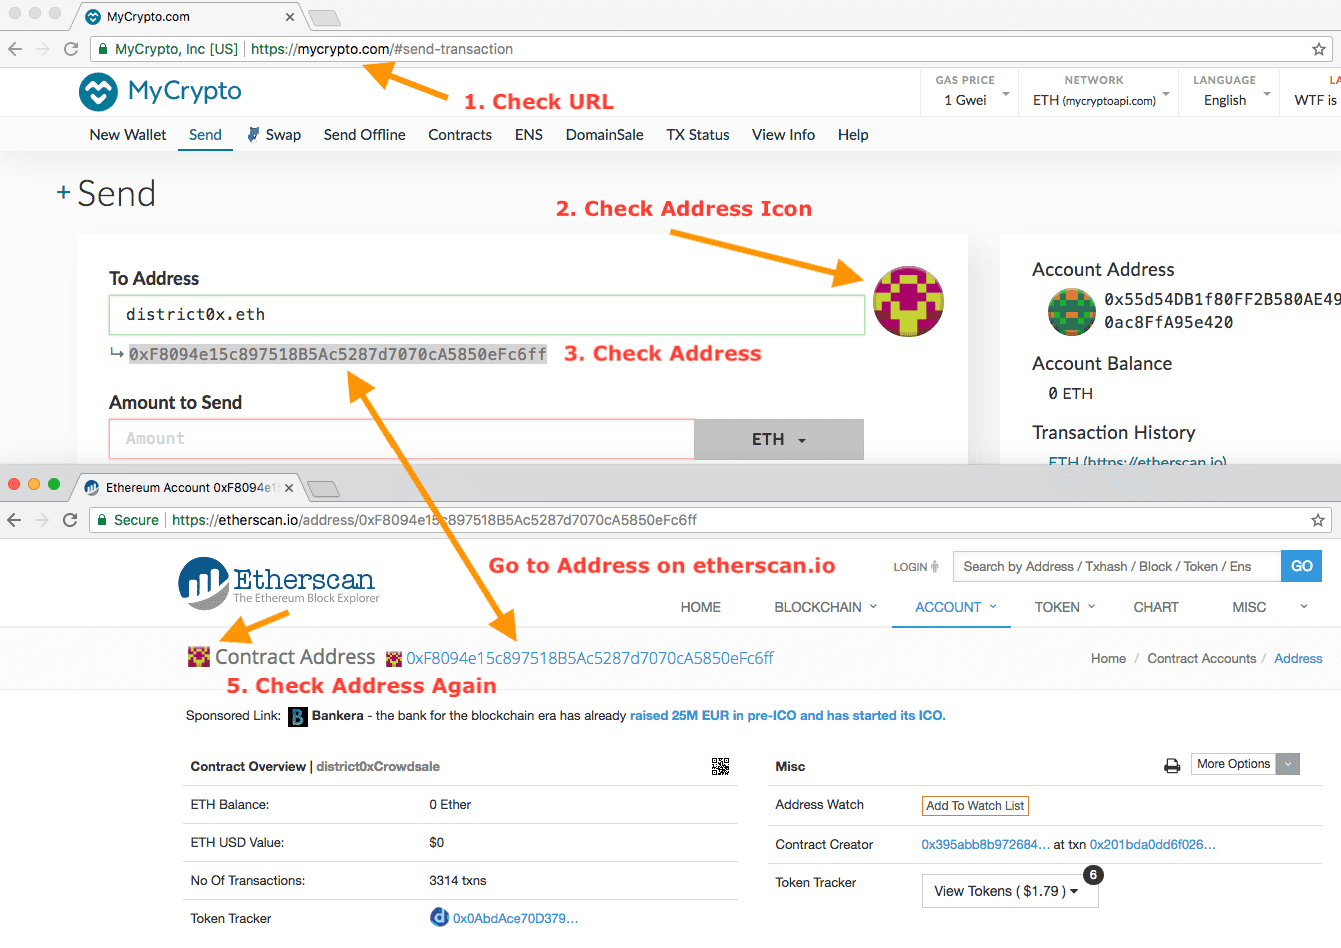 how to know if my crypto.com account is verified